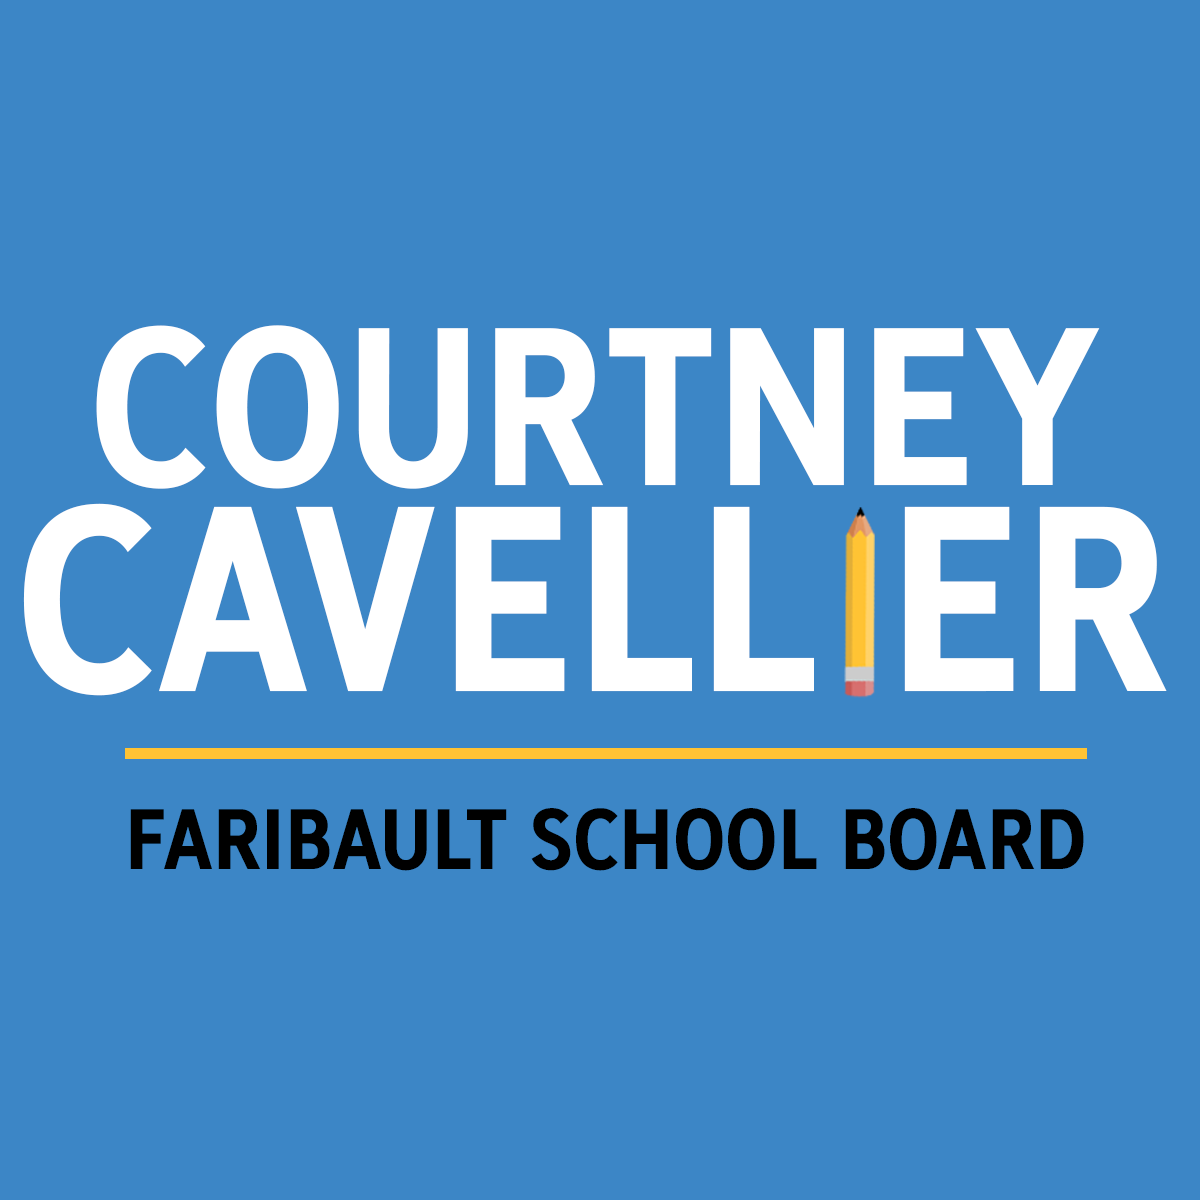 Vote for Courtney!